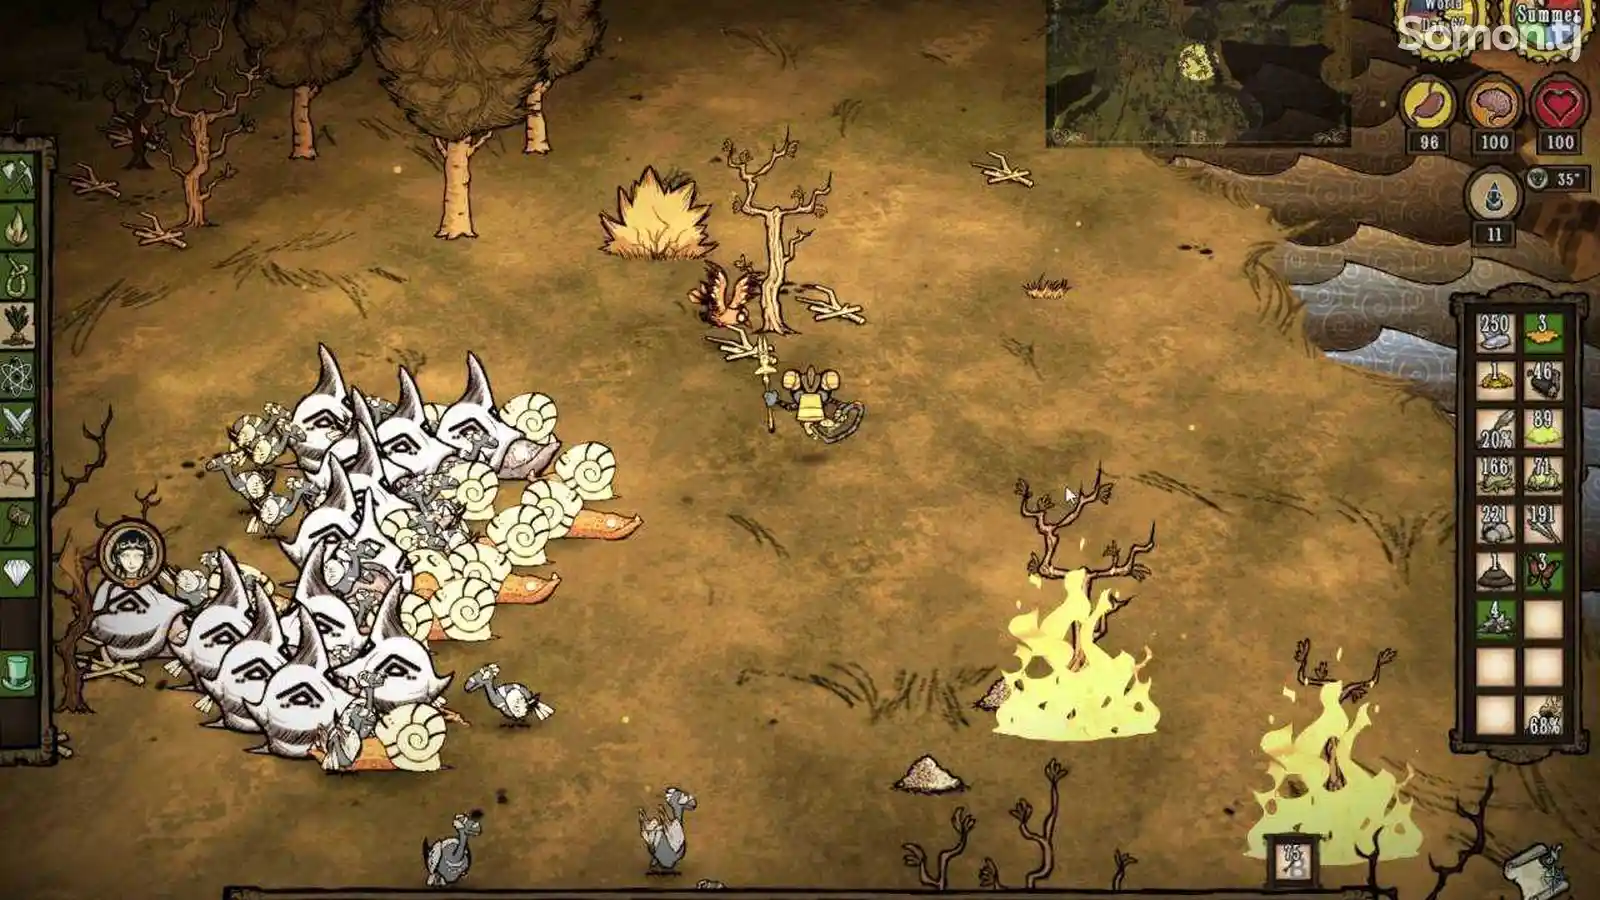 Игра Dont starve together console edition для PS-4 / 5.05 / 6.72 / 7.02 / 9.00 /-3